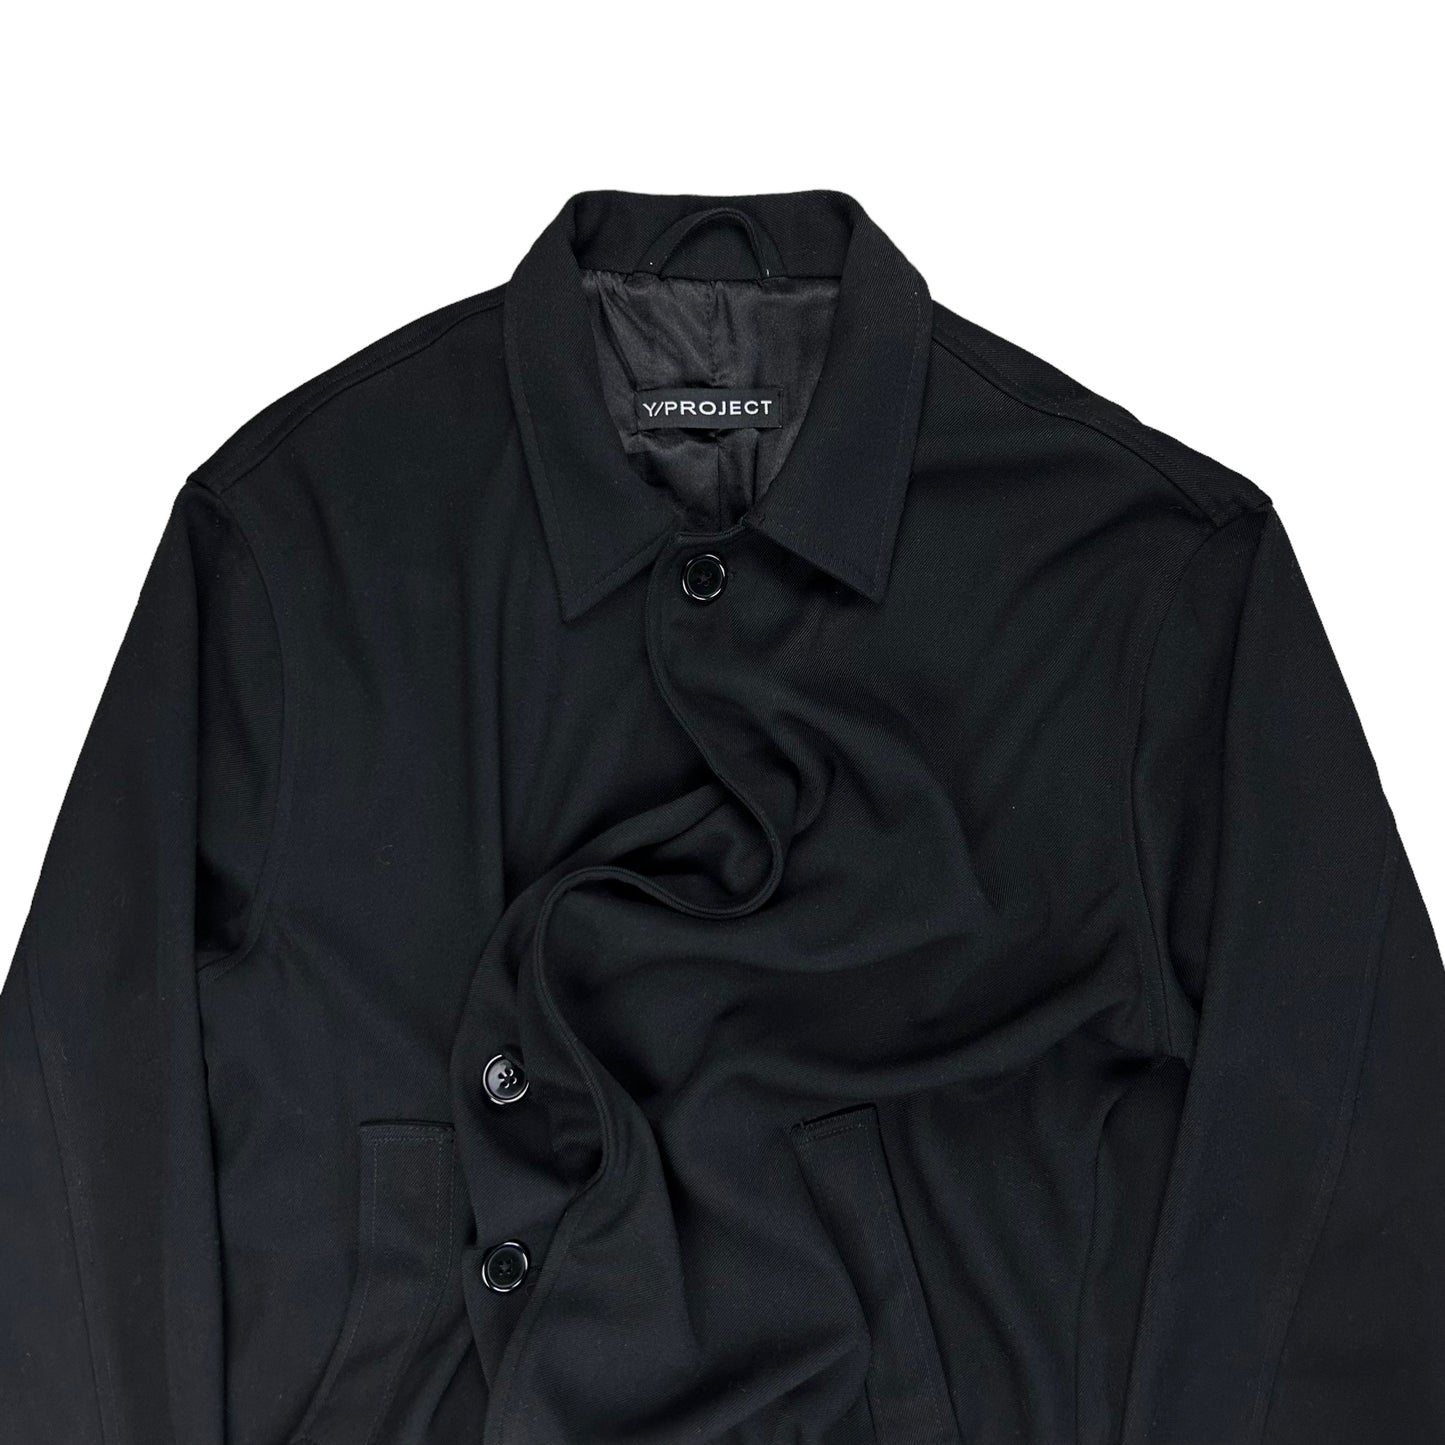 Y/Project Asymmetric Twisted Work Jacket - SS20